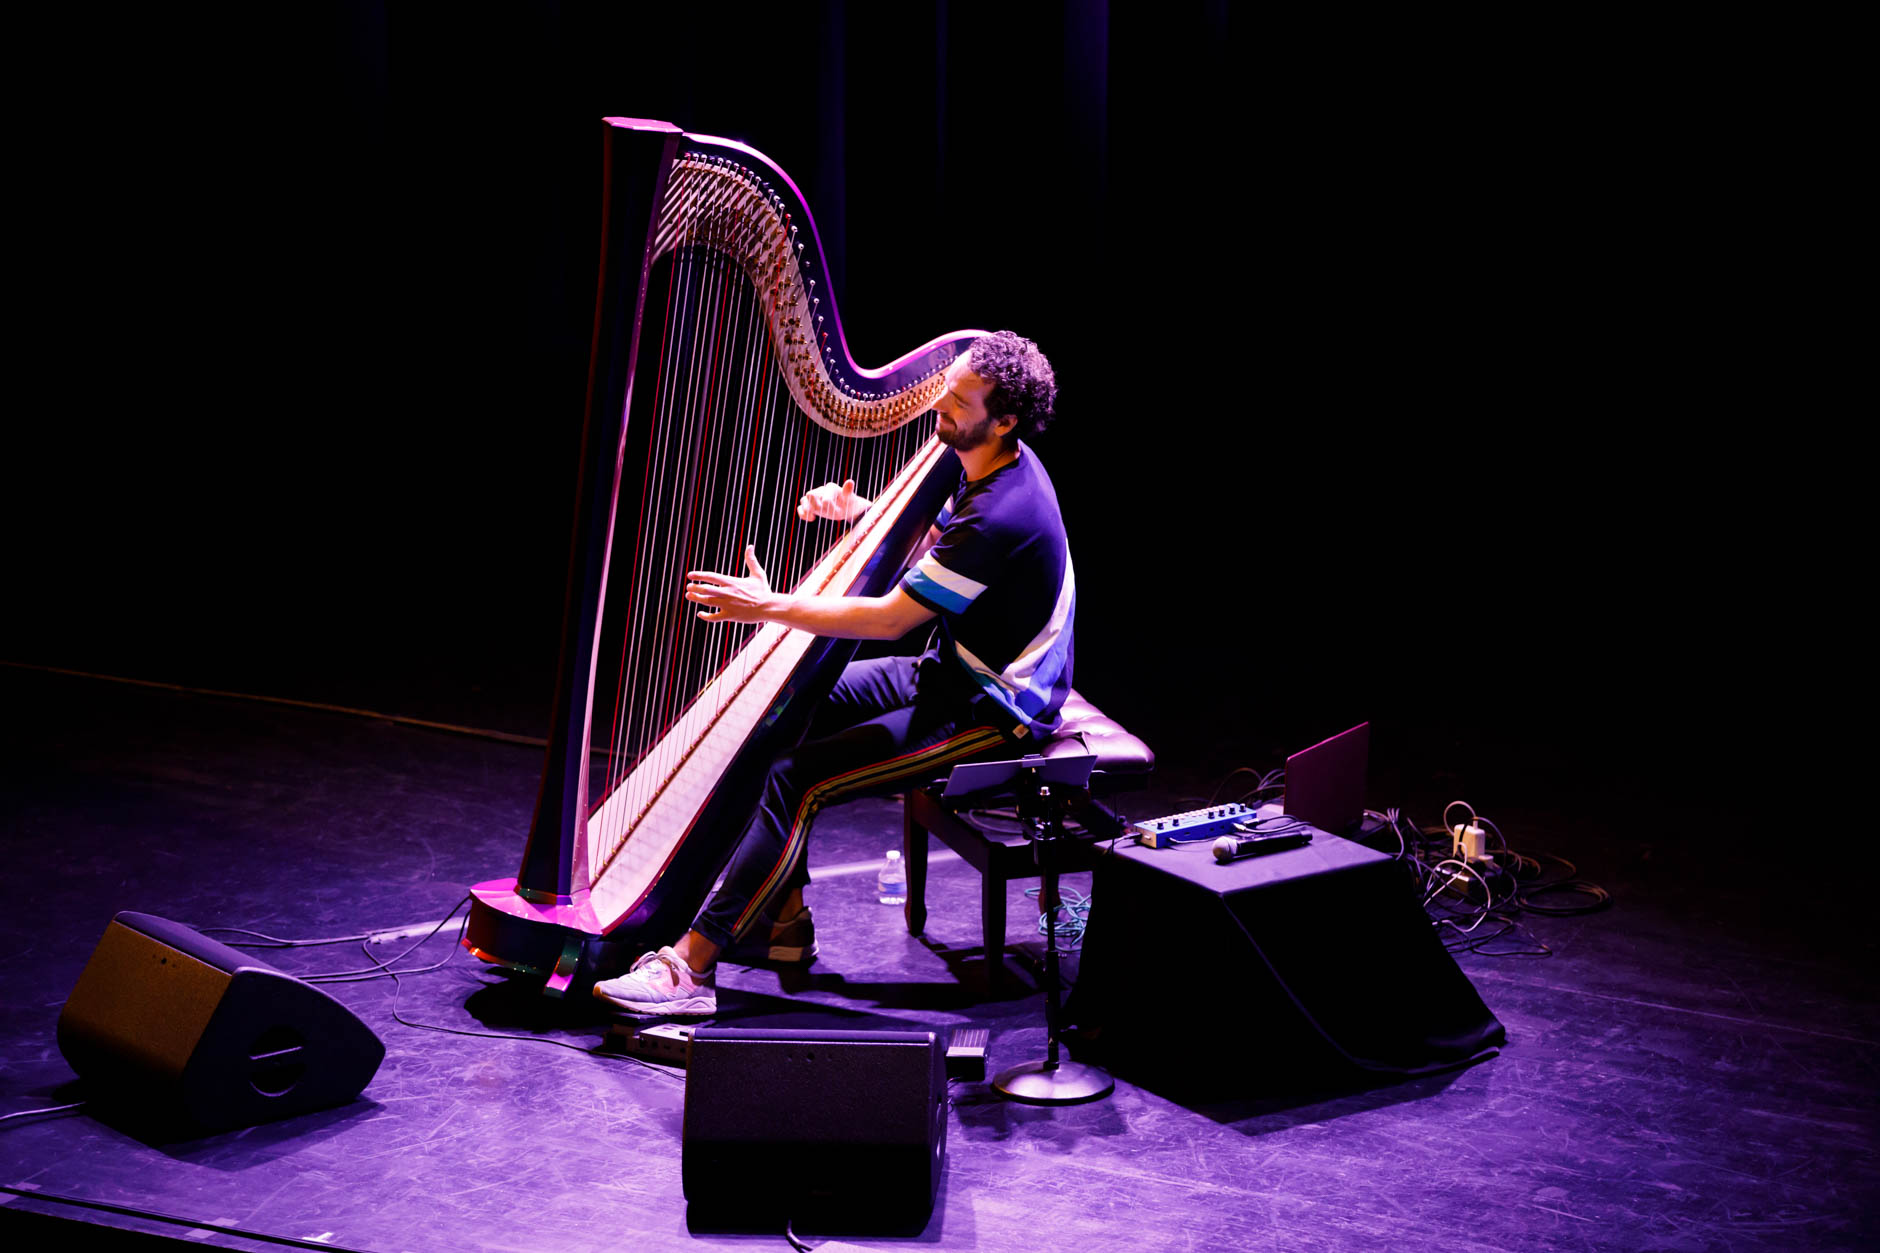 Remy van Kesteren performs during his laureate recital at the 11th USA International Harp Competition at the Buskirk-Chumley Theater in Bloomington, Indiana on Saturday, July 6, 2019. (Photo by James Brosher)